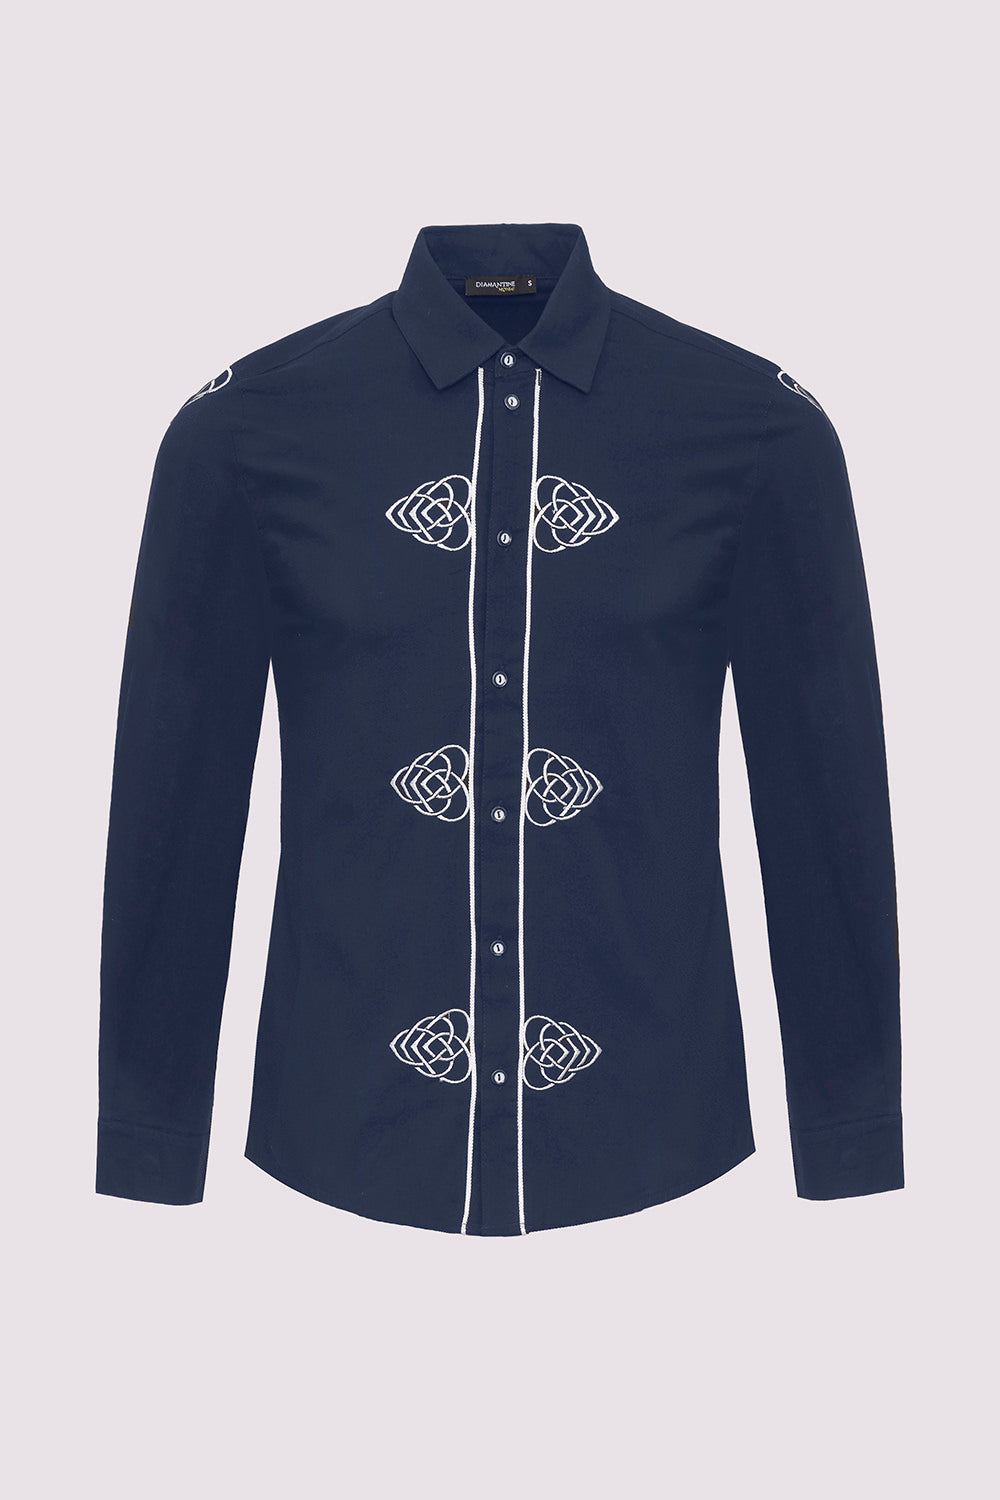 Sami Collared Long Sleeve Embroidered Men's Shirt in Marine